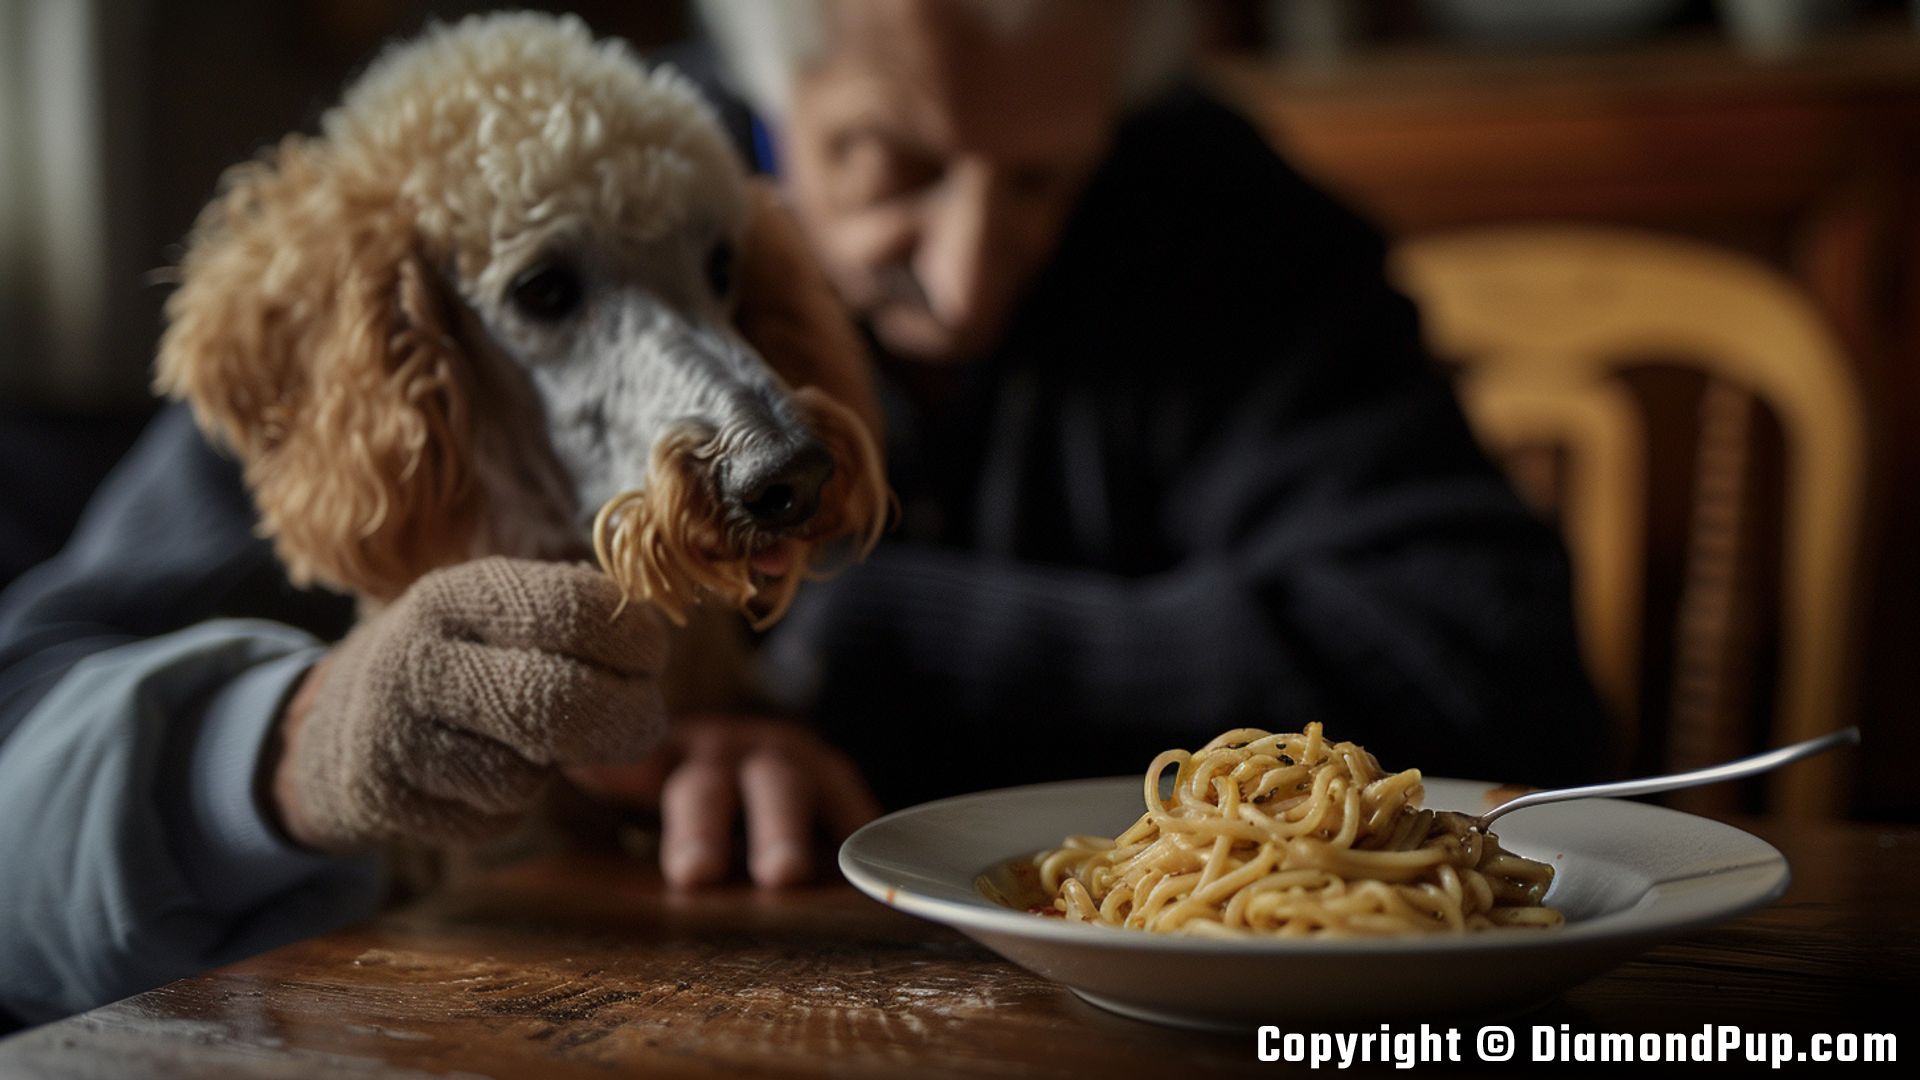 Photograph of a Happy Poodle Snacking on Pasta